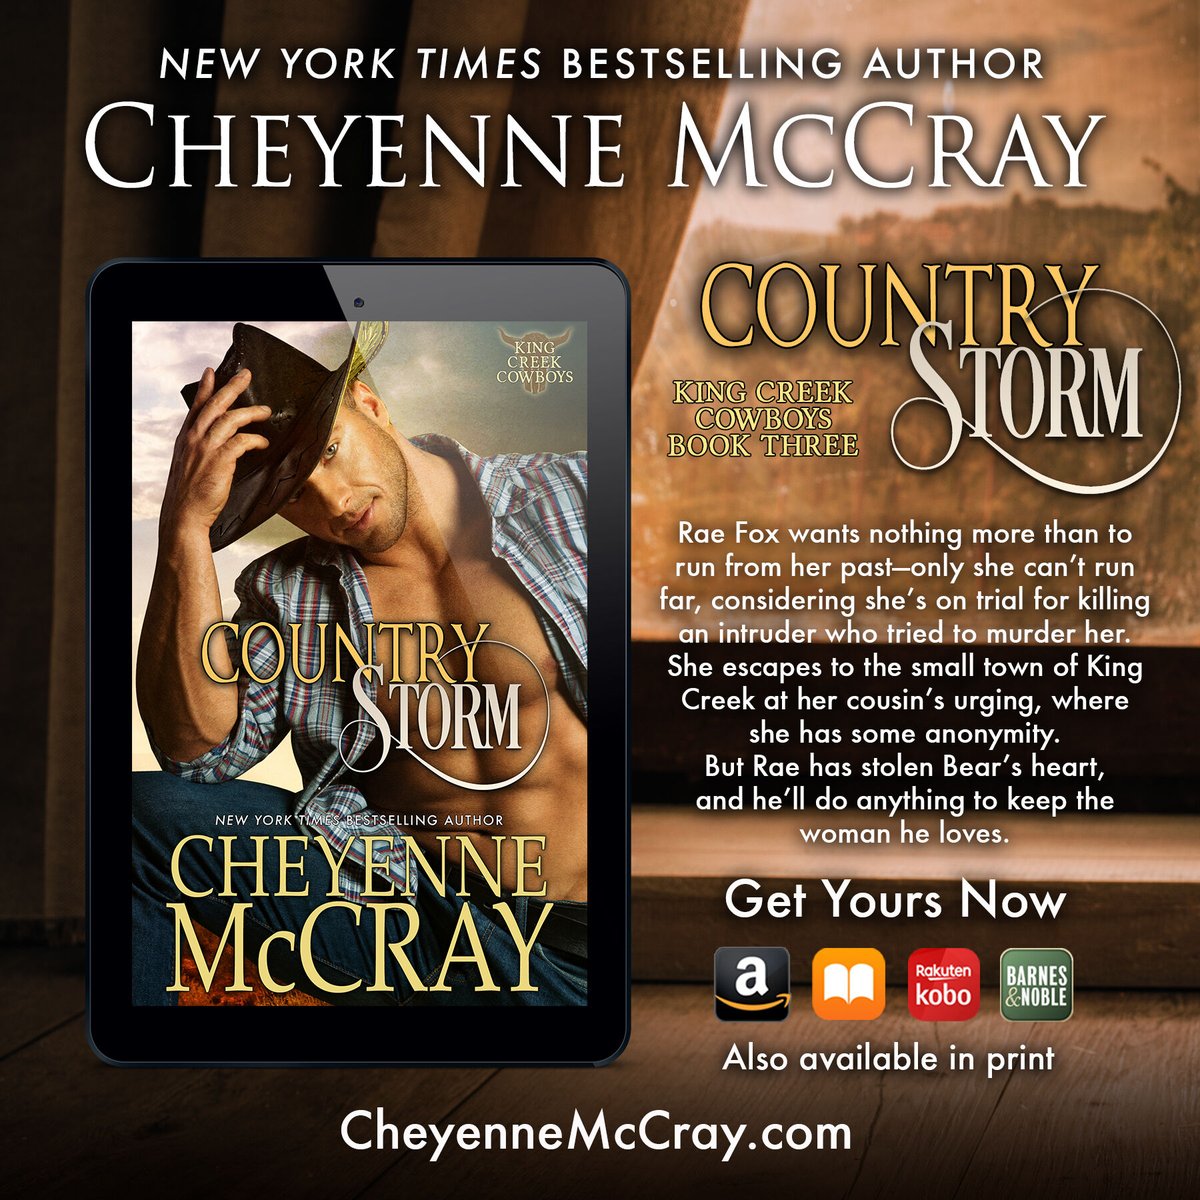 Country Storm is FREE for a limited time. 😁 🤠 🌵 👢 ❤️ amazon.com/dp/B08BR4JDSB

#writerscommunity #countrystorm #freeebooks #sexycowboys #cowboysaresexy #ilovecowboys #cowboyromance #romanceauthor #romancereader #kingcreekcowboys #contemporaryromance #cheyennemccray